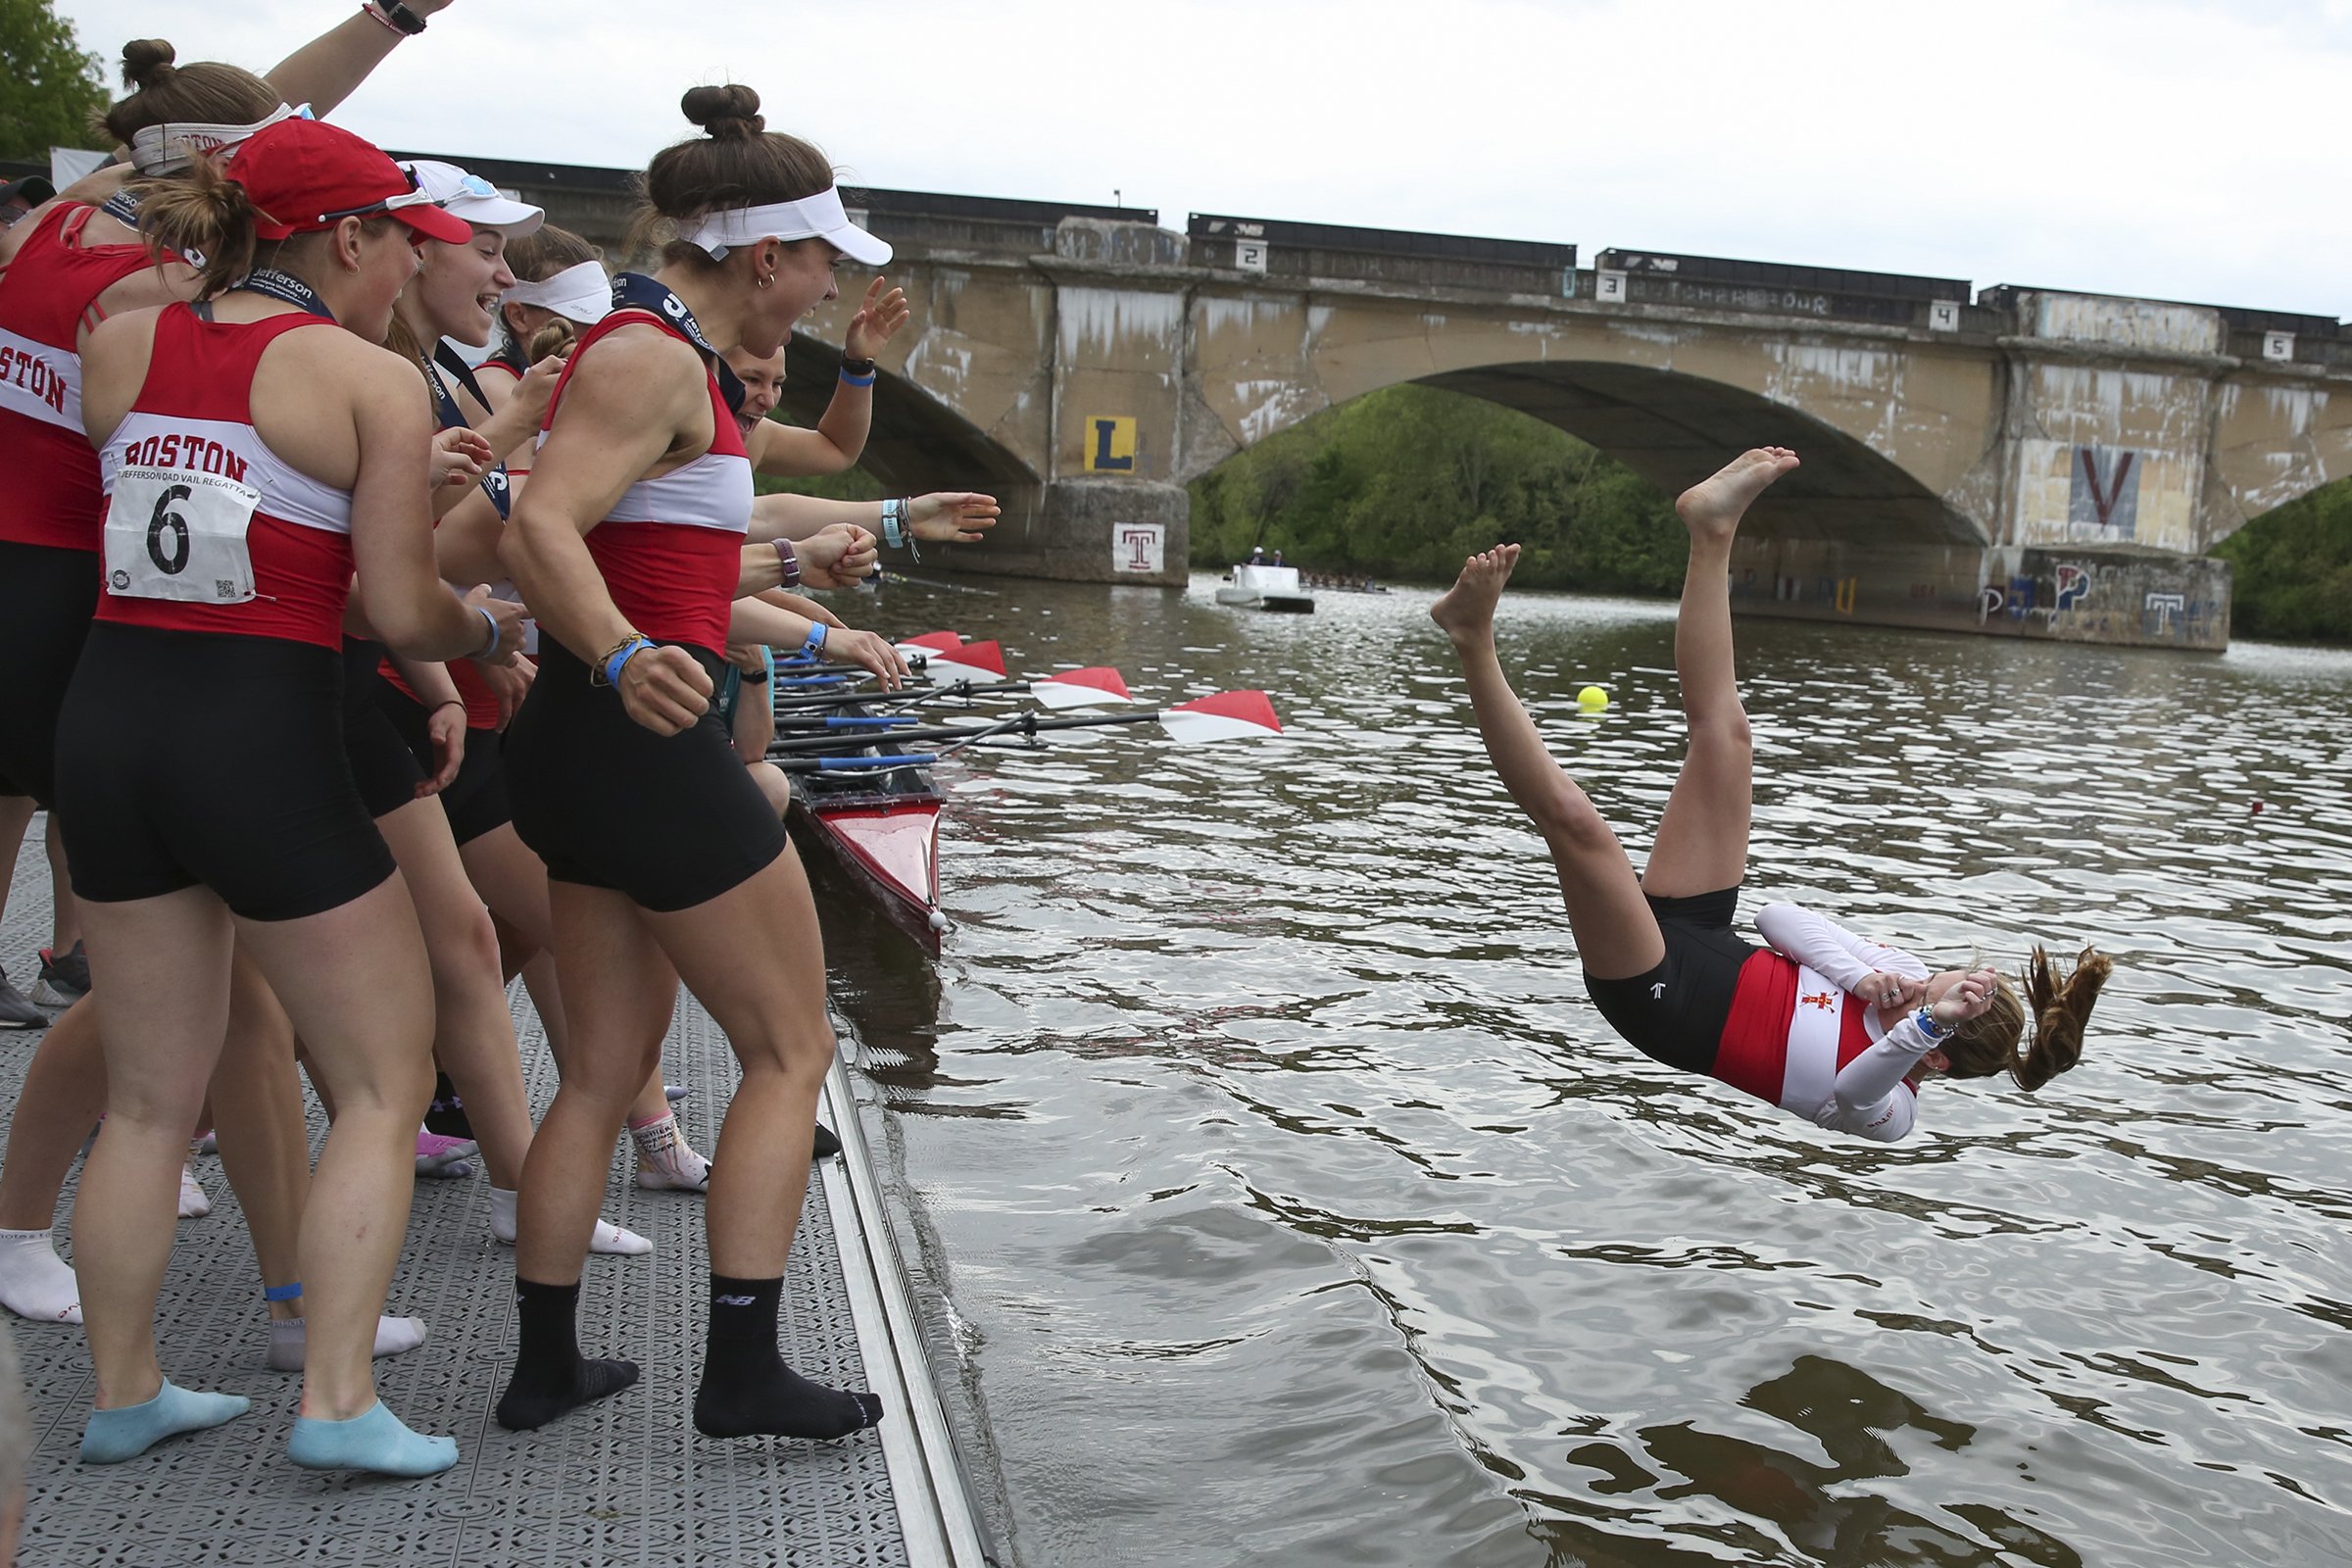  The Boston women's rowing team throws their coxswain in the water after winning first place in the Women's Varsity Heavyweight Eight race at the 81st annual Dad Vail Regatta in Philadelphia on May 11, 2019. 